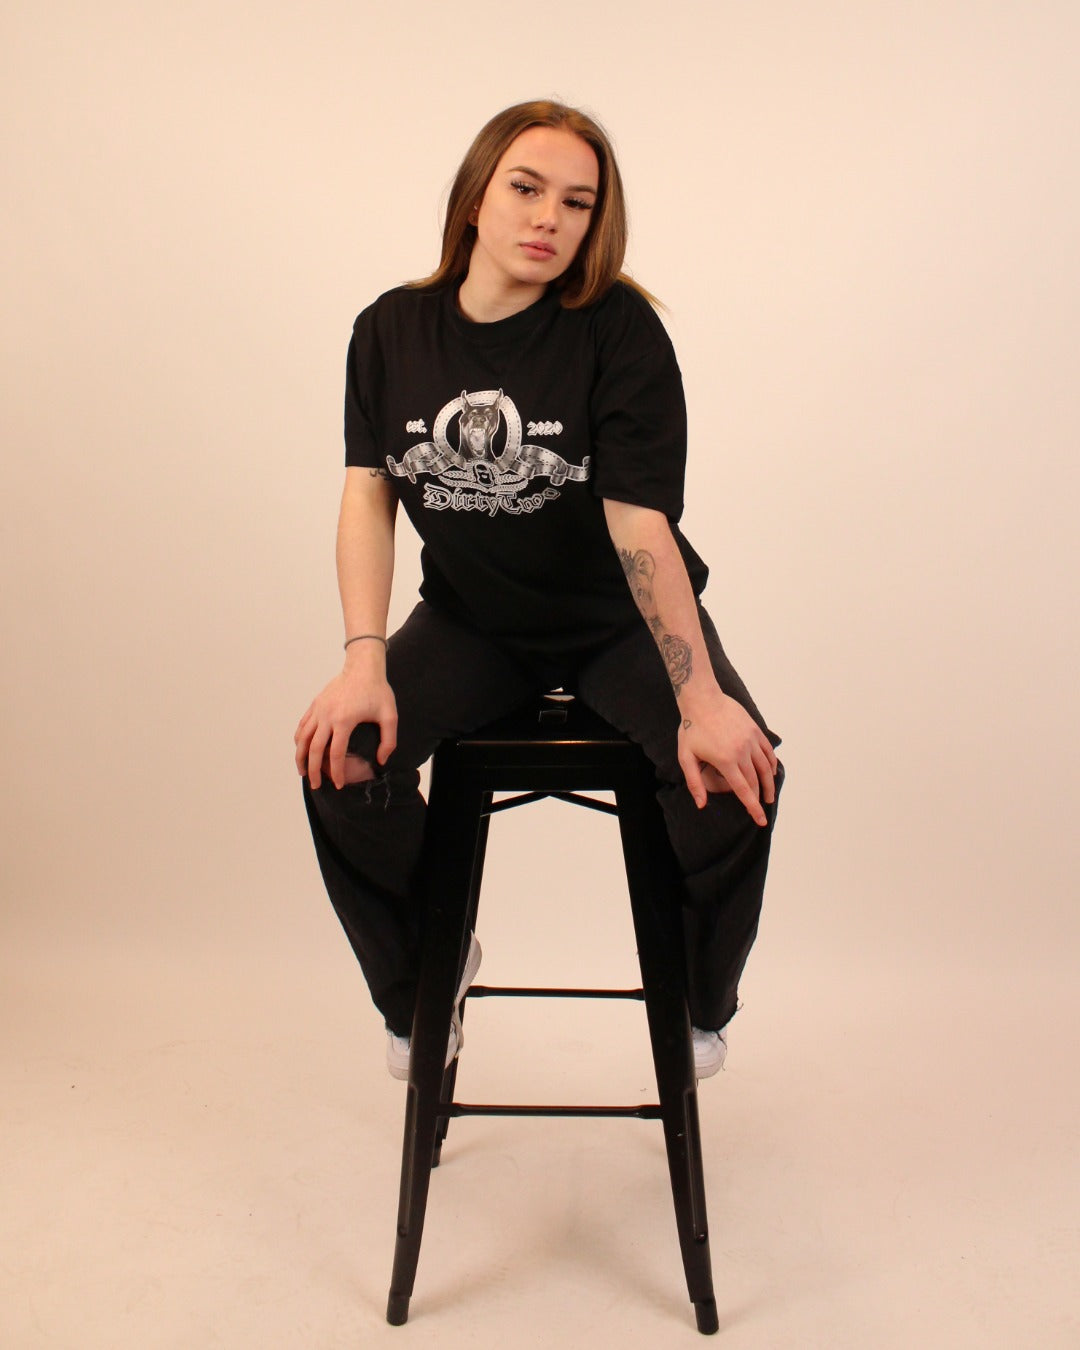 Dirty Two Dirtywood Oversize Shirt